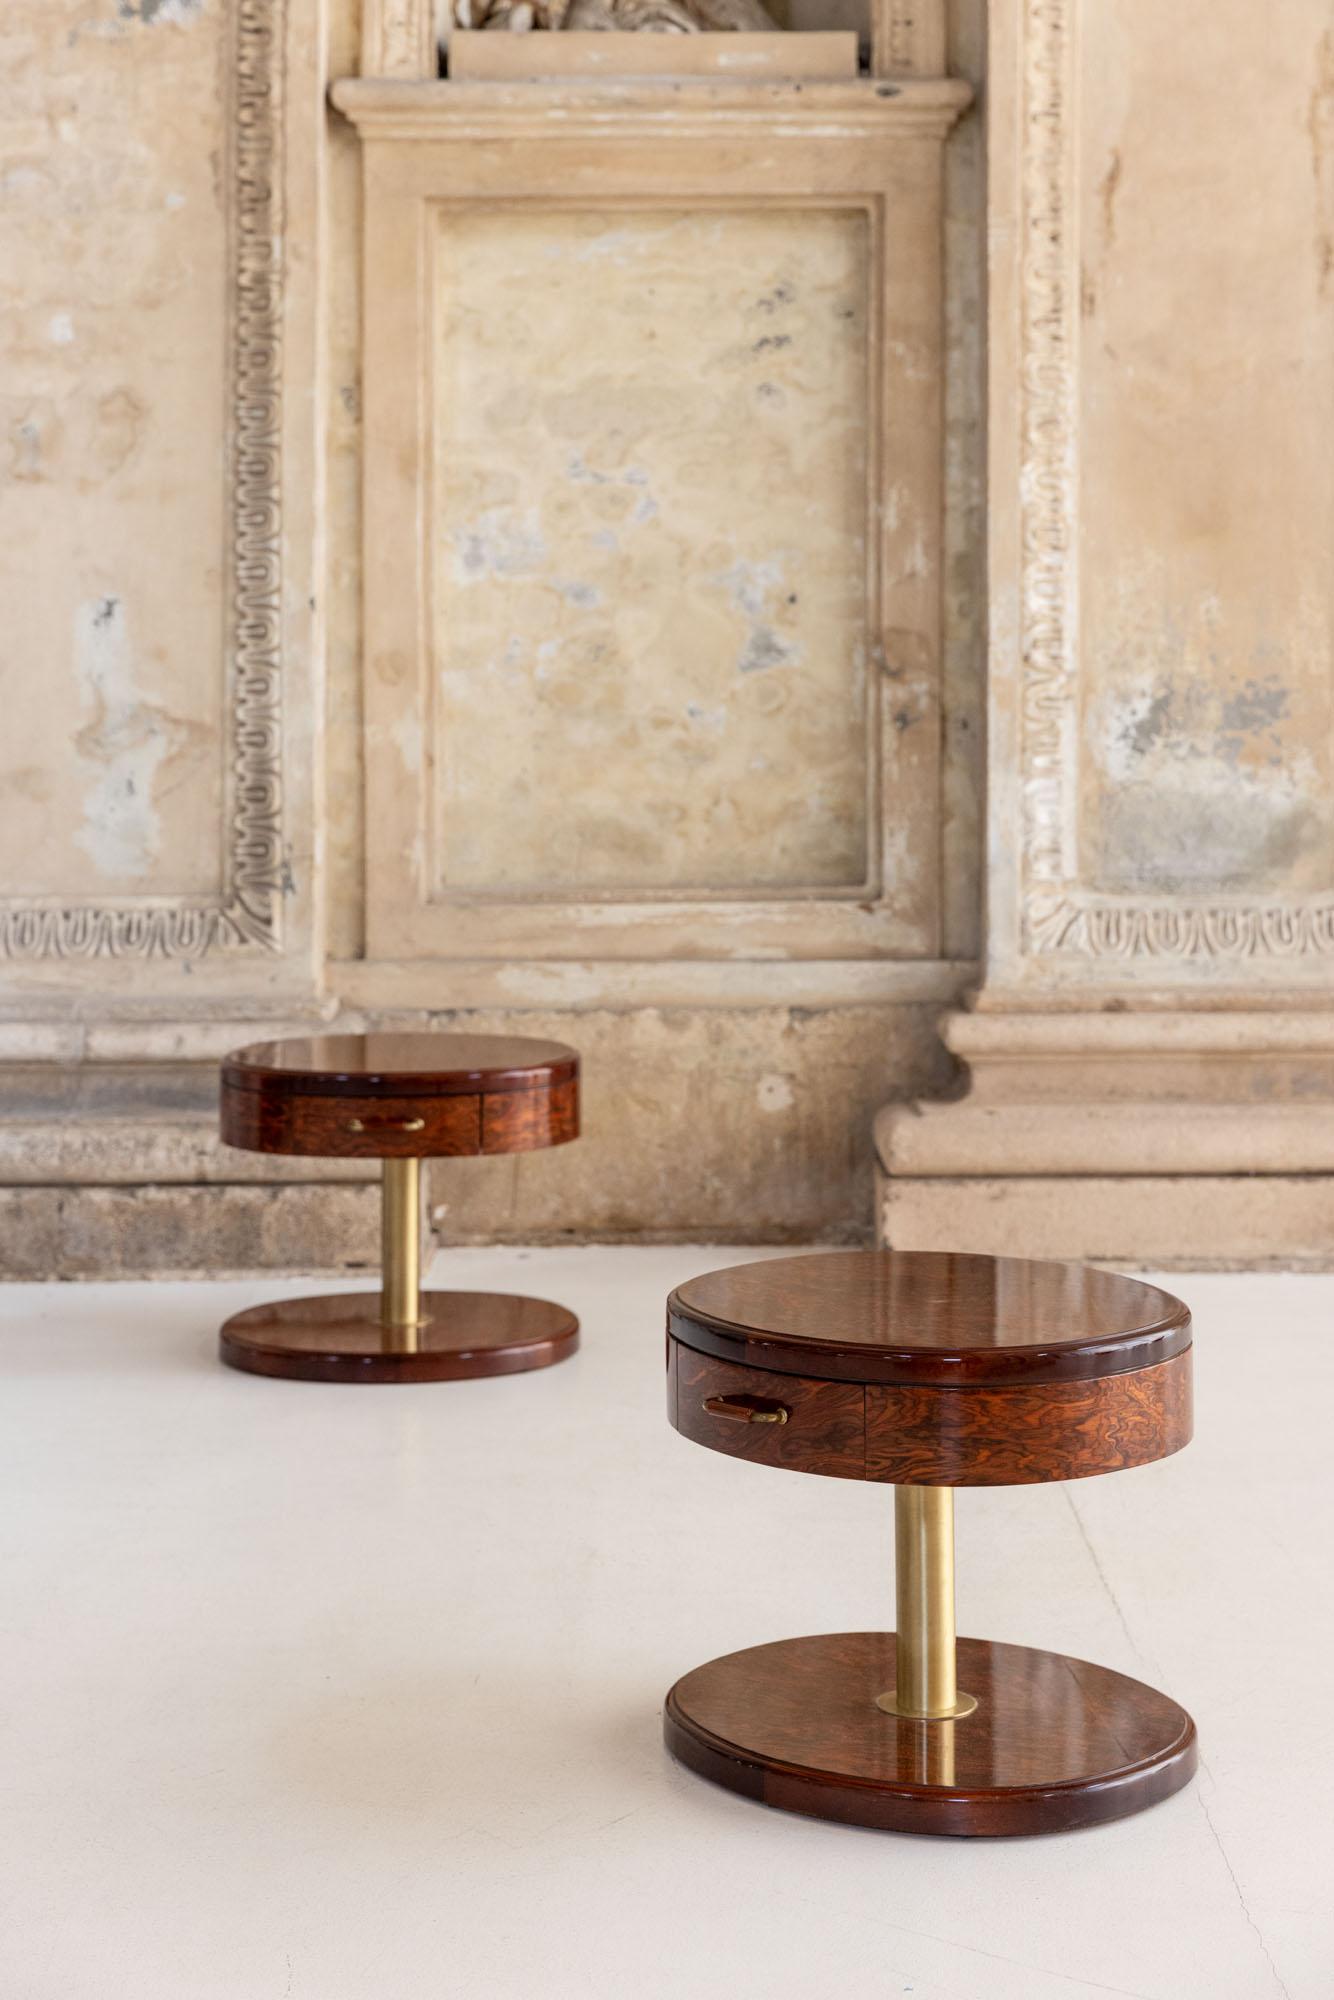 Stunning pair of night stand tables designed by Luciano Frigerio.
Original veneered wood structure with golden brass details 
Italy, 1970s